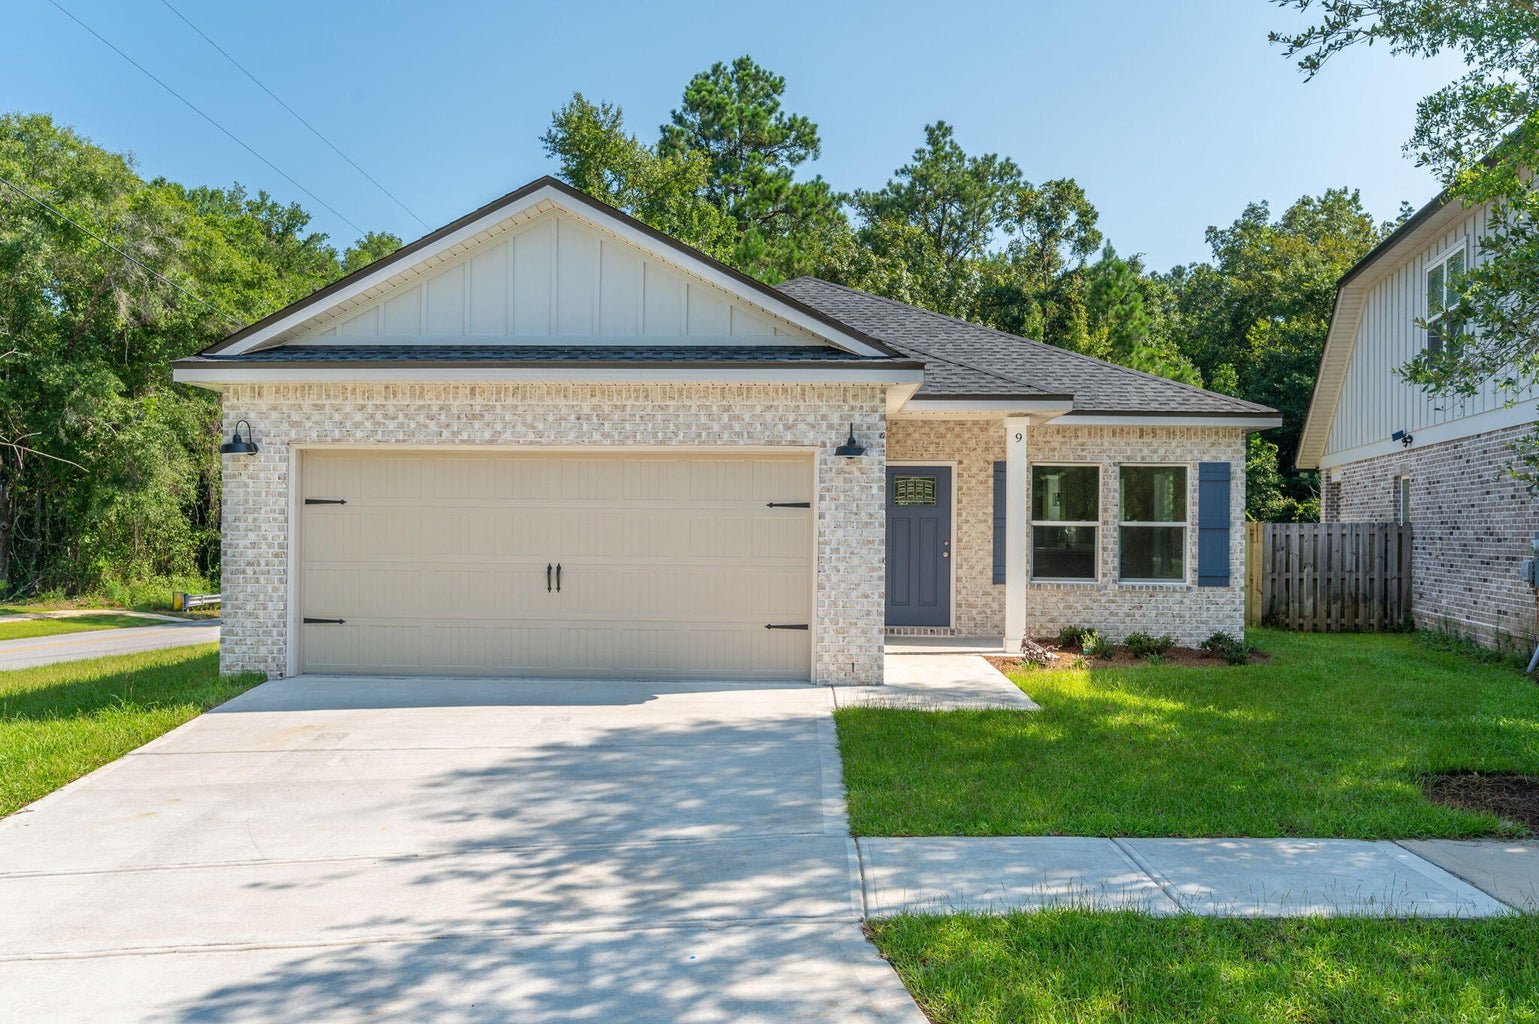 🏡 **New Listing Alert!** 🏡

🌟 Price: $278,000
📍 Address: 6482 Burleson Boulevard, Crestview, FL 32536
🛏️ Bedrooms: 3
🛁 Total Baths: 2
🚿 Full Baths: 2

Welcome home to this cozy all-brick beauty with NO HOA fees, perfectly situated on the north